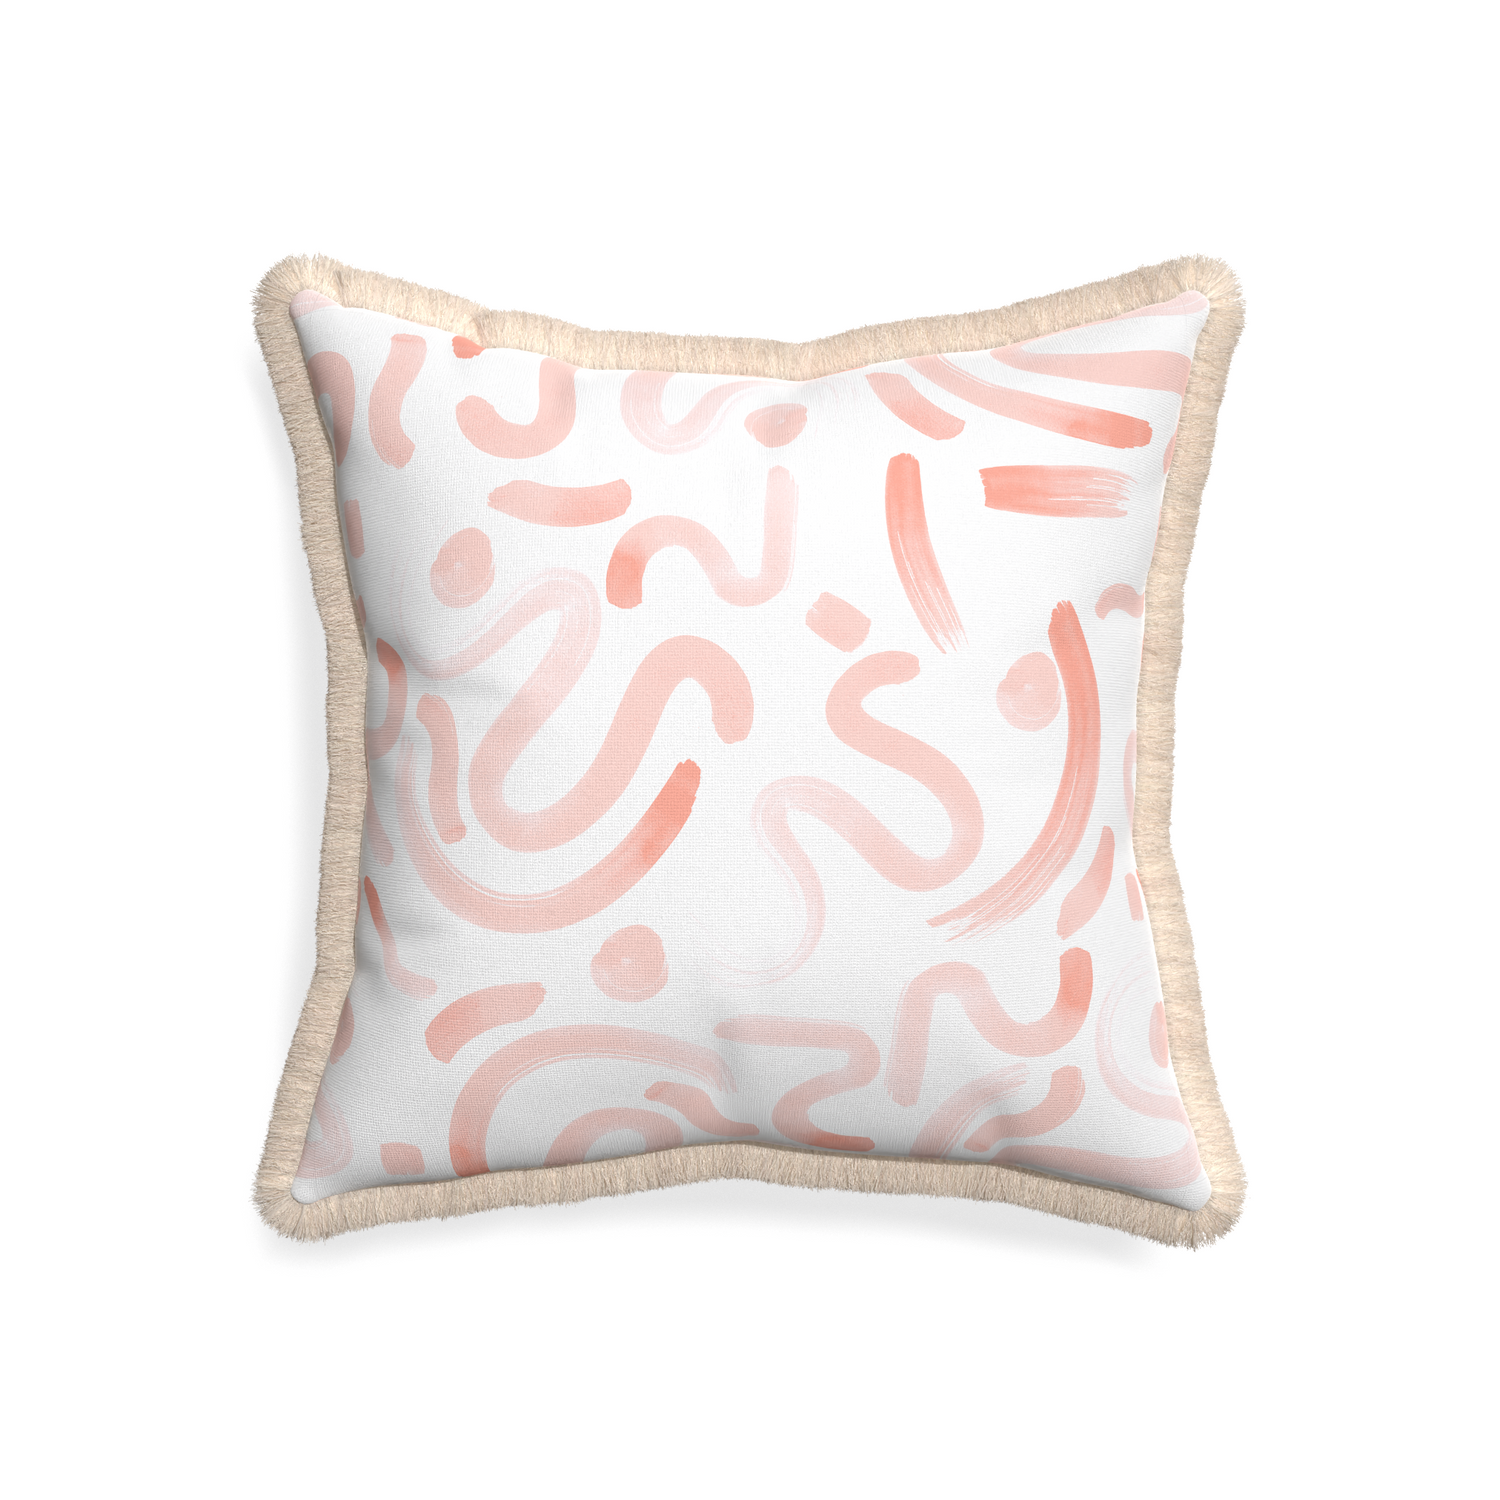 20-square hockney pink custom pink graphicpillow with cream fringe on white background